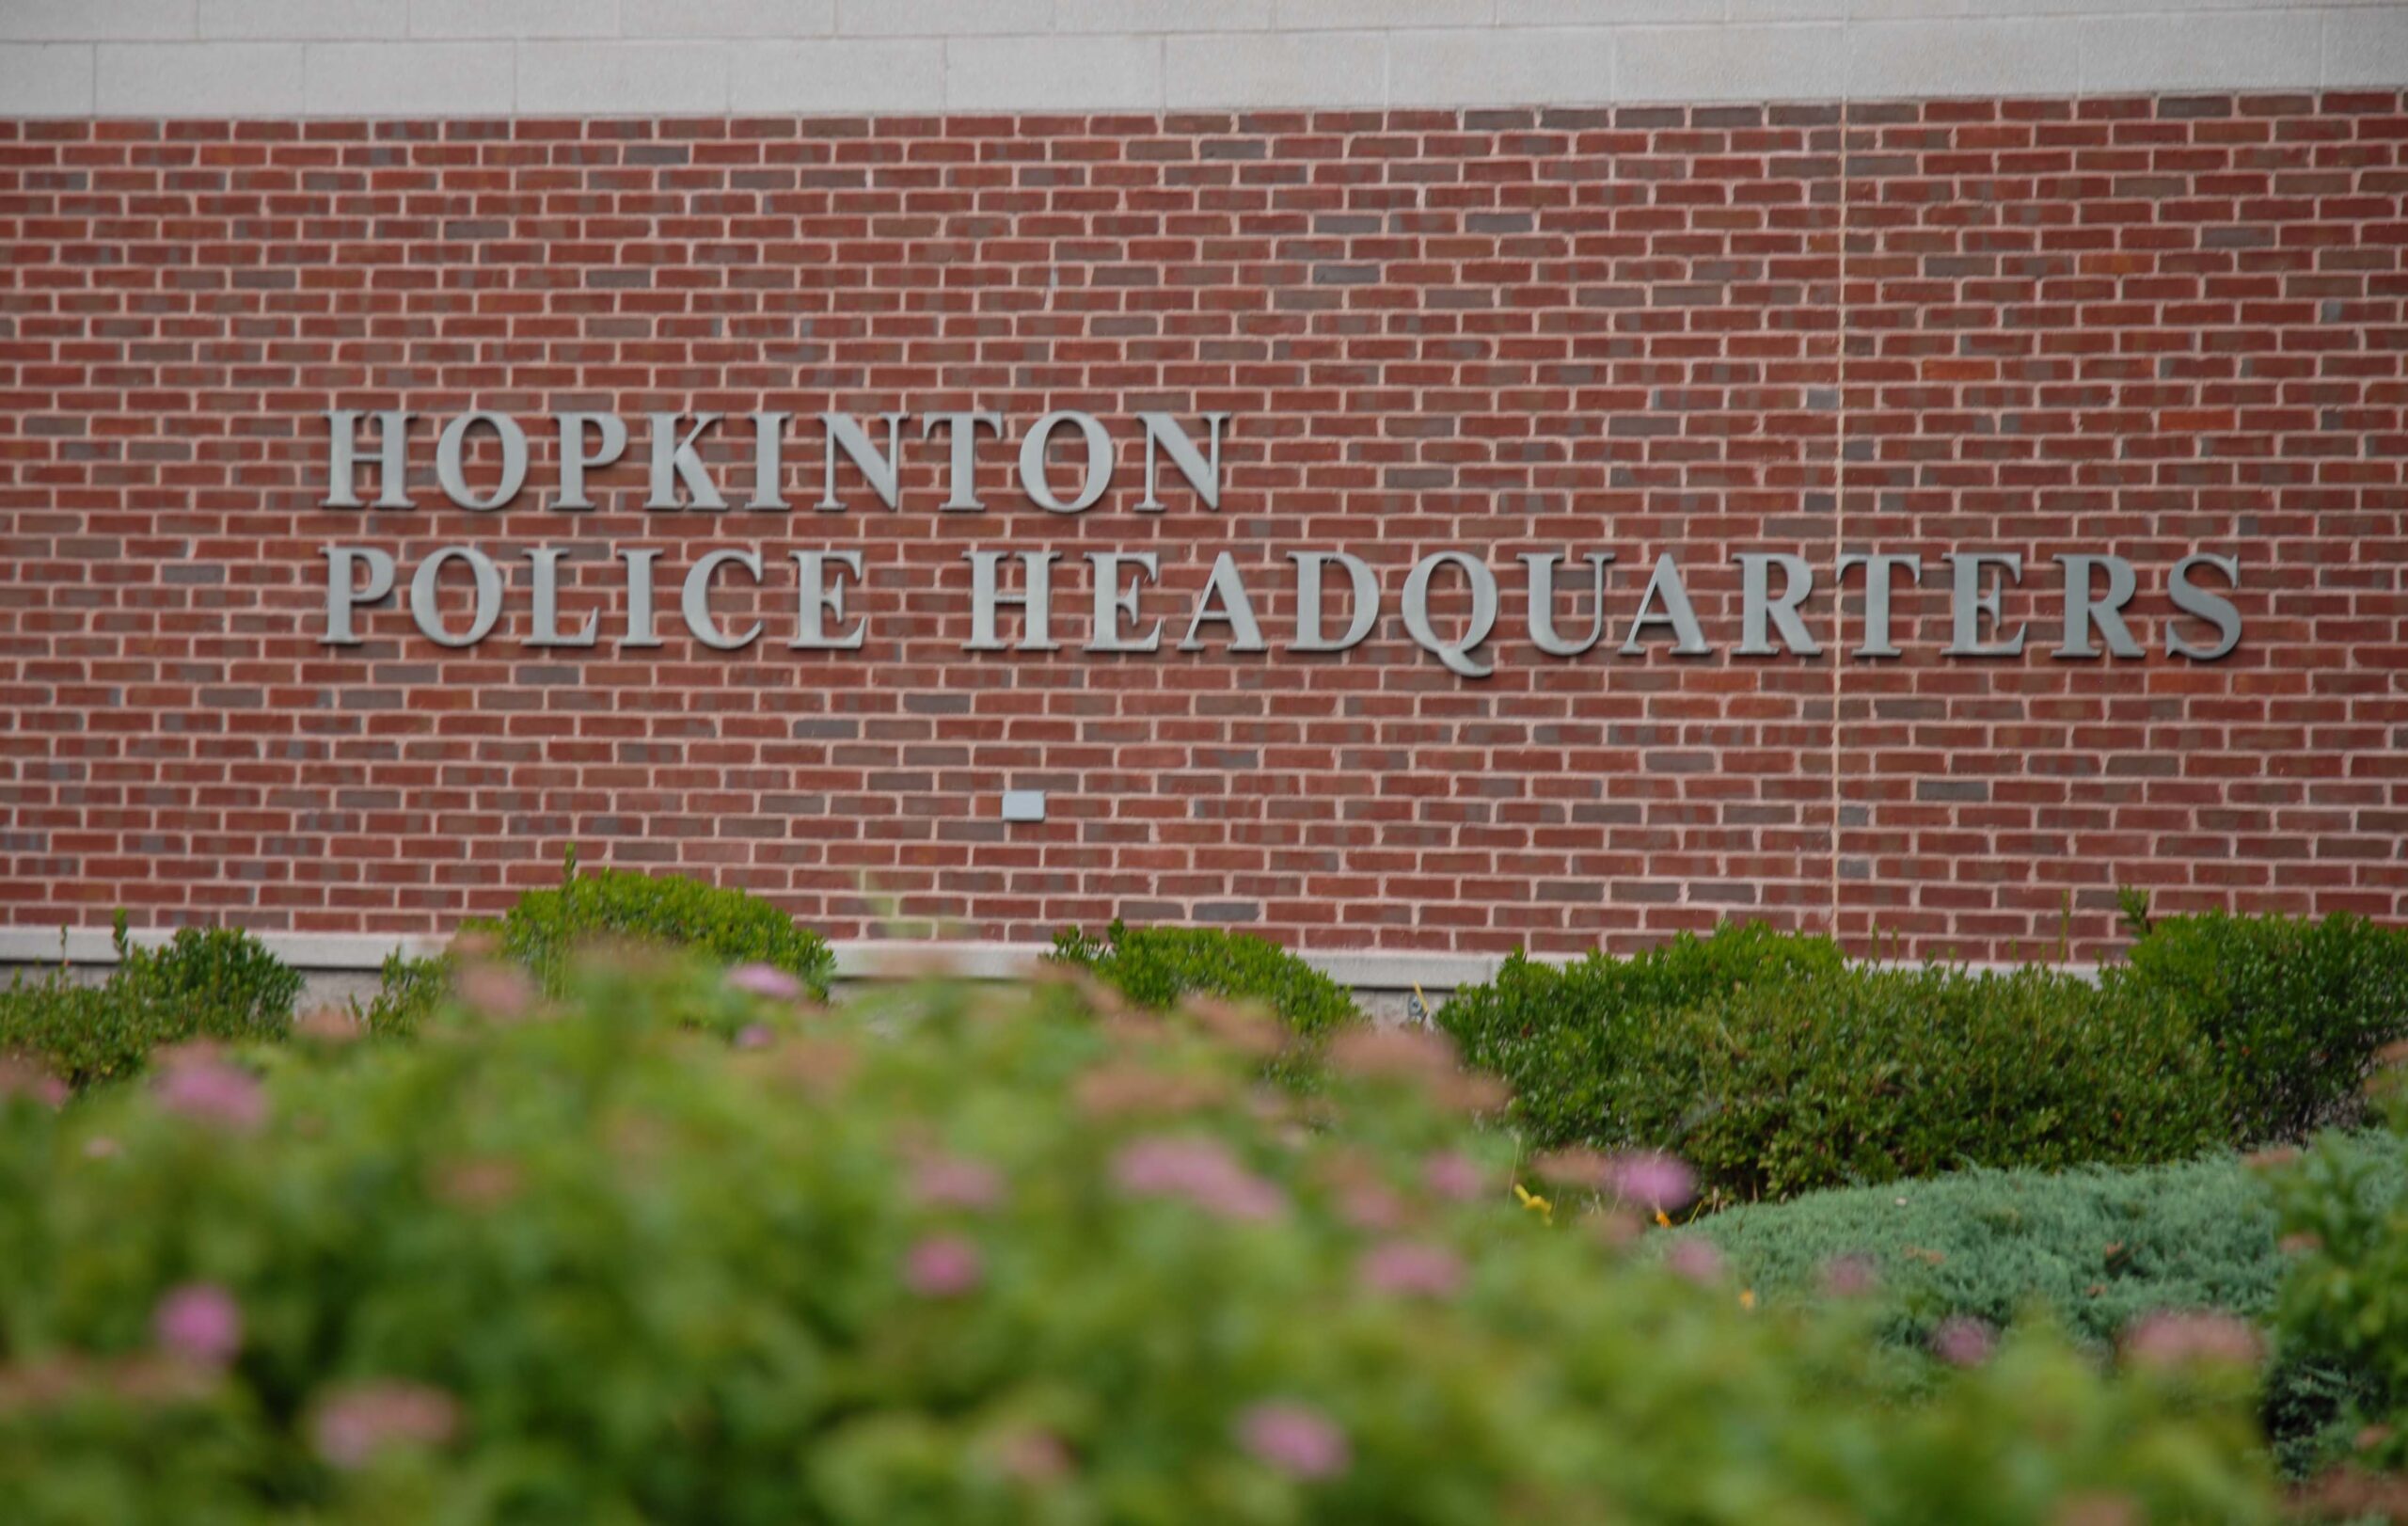 Hopkinton Police Department warns public about scam calls from person pretending to be an officer